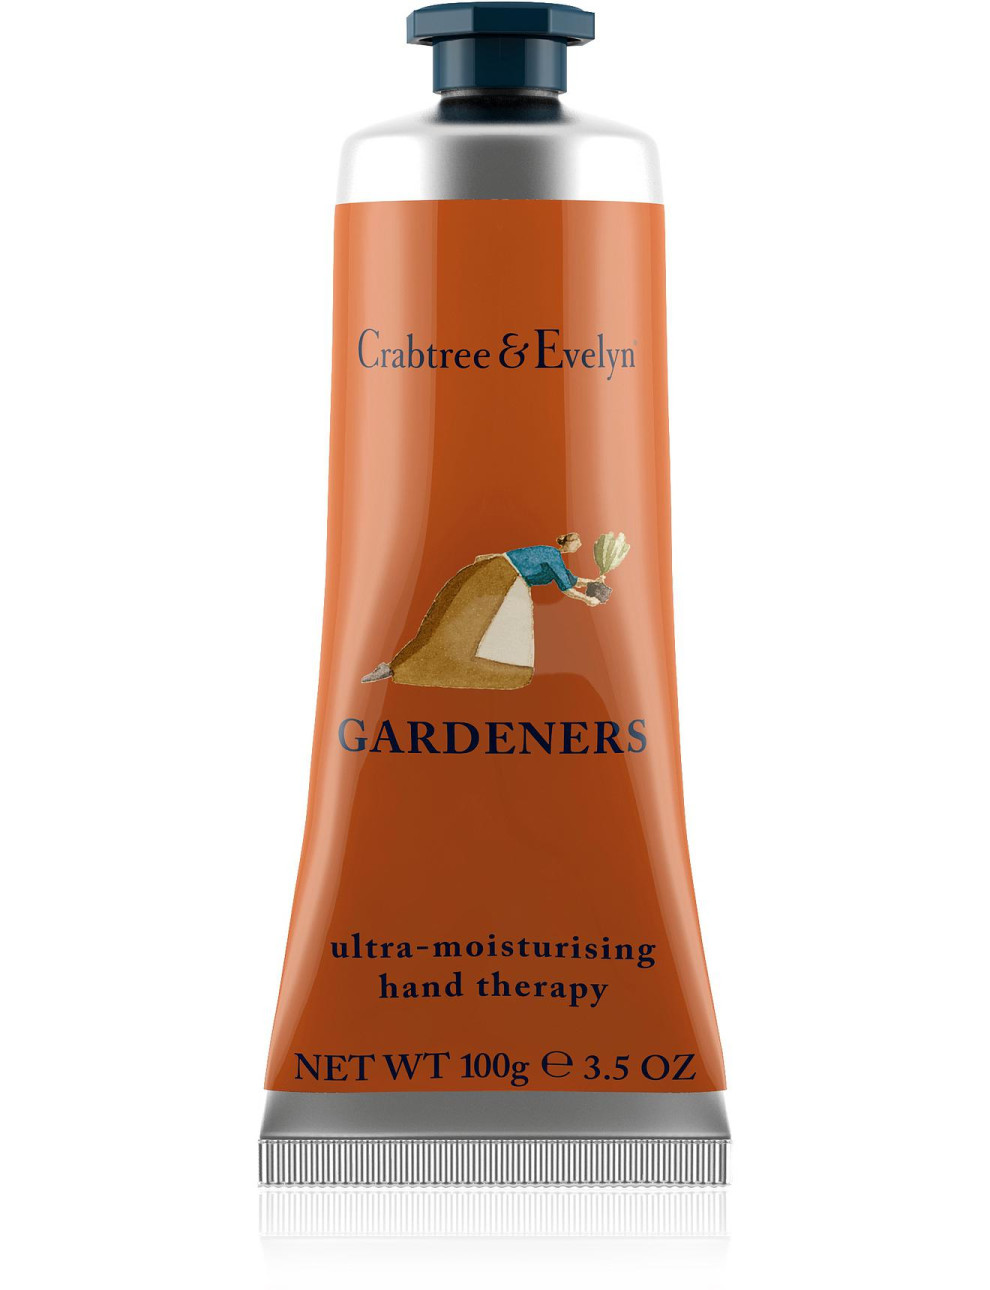 Crabtree & Evelyn Gardeners Hand Therapy 100g